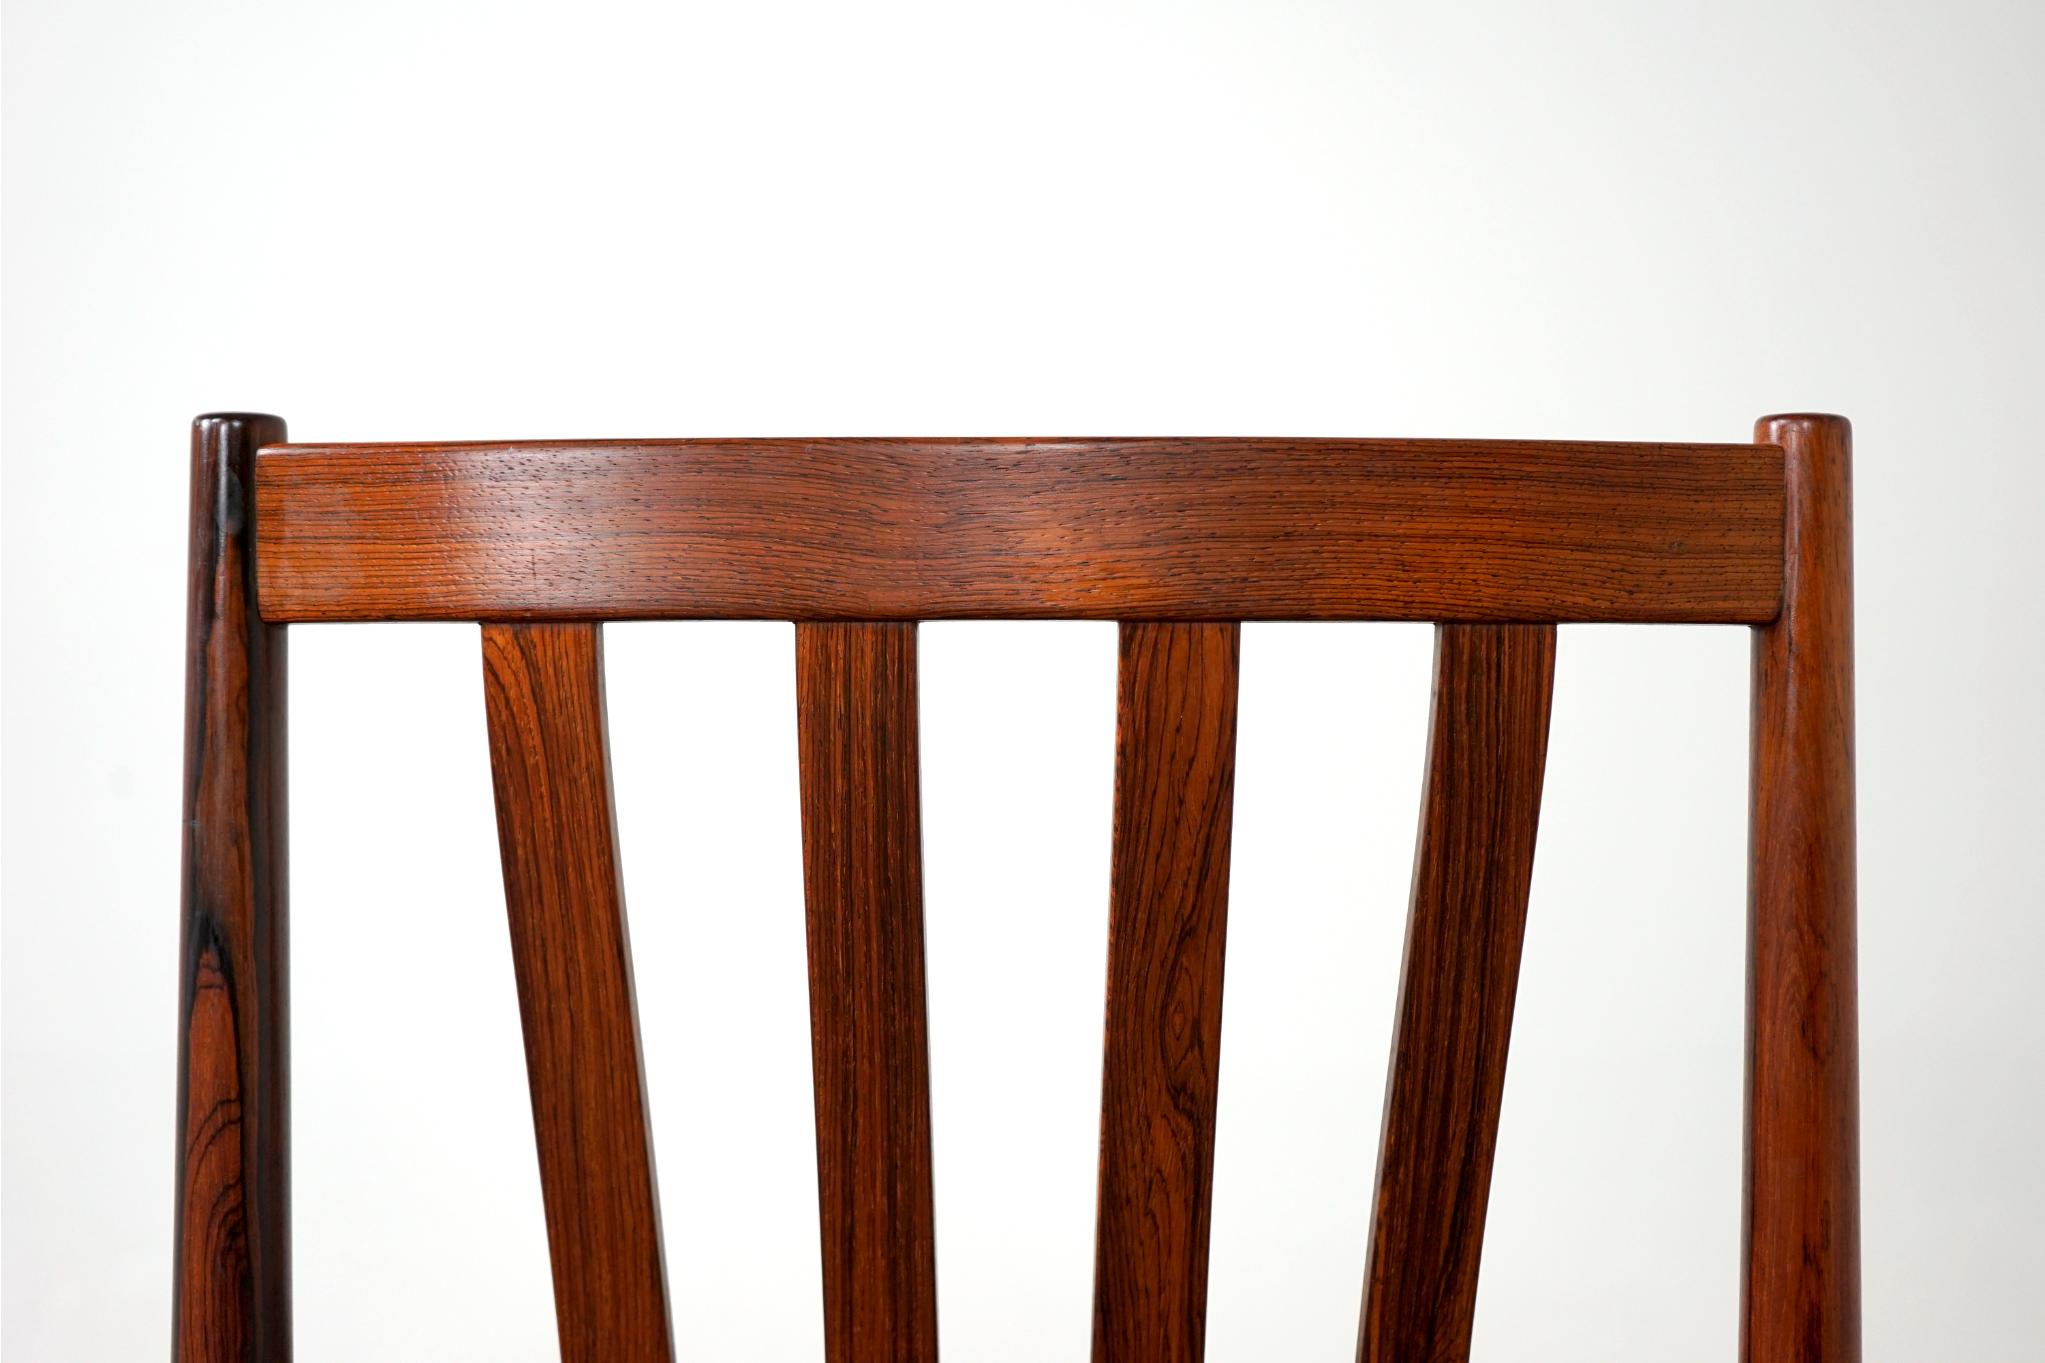 Set of 6 Danish Modern Rosewood Dining Chairs by Slagelse Mobelfabrik For Sale 4